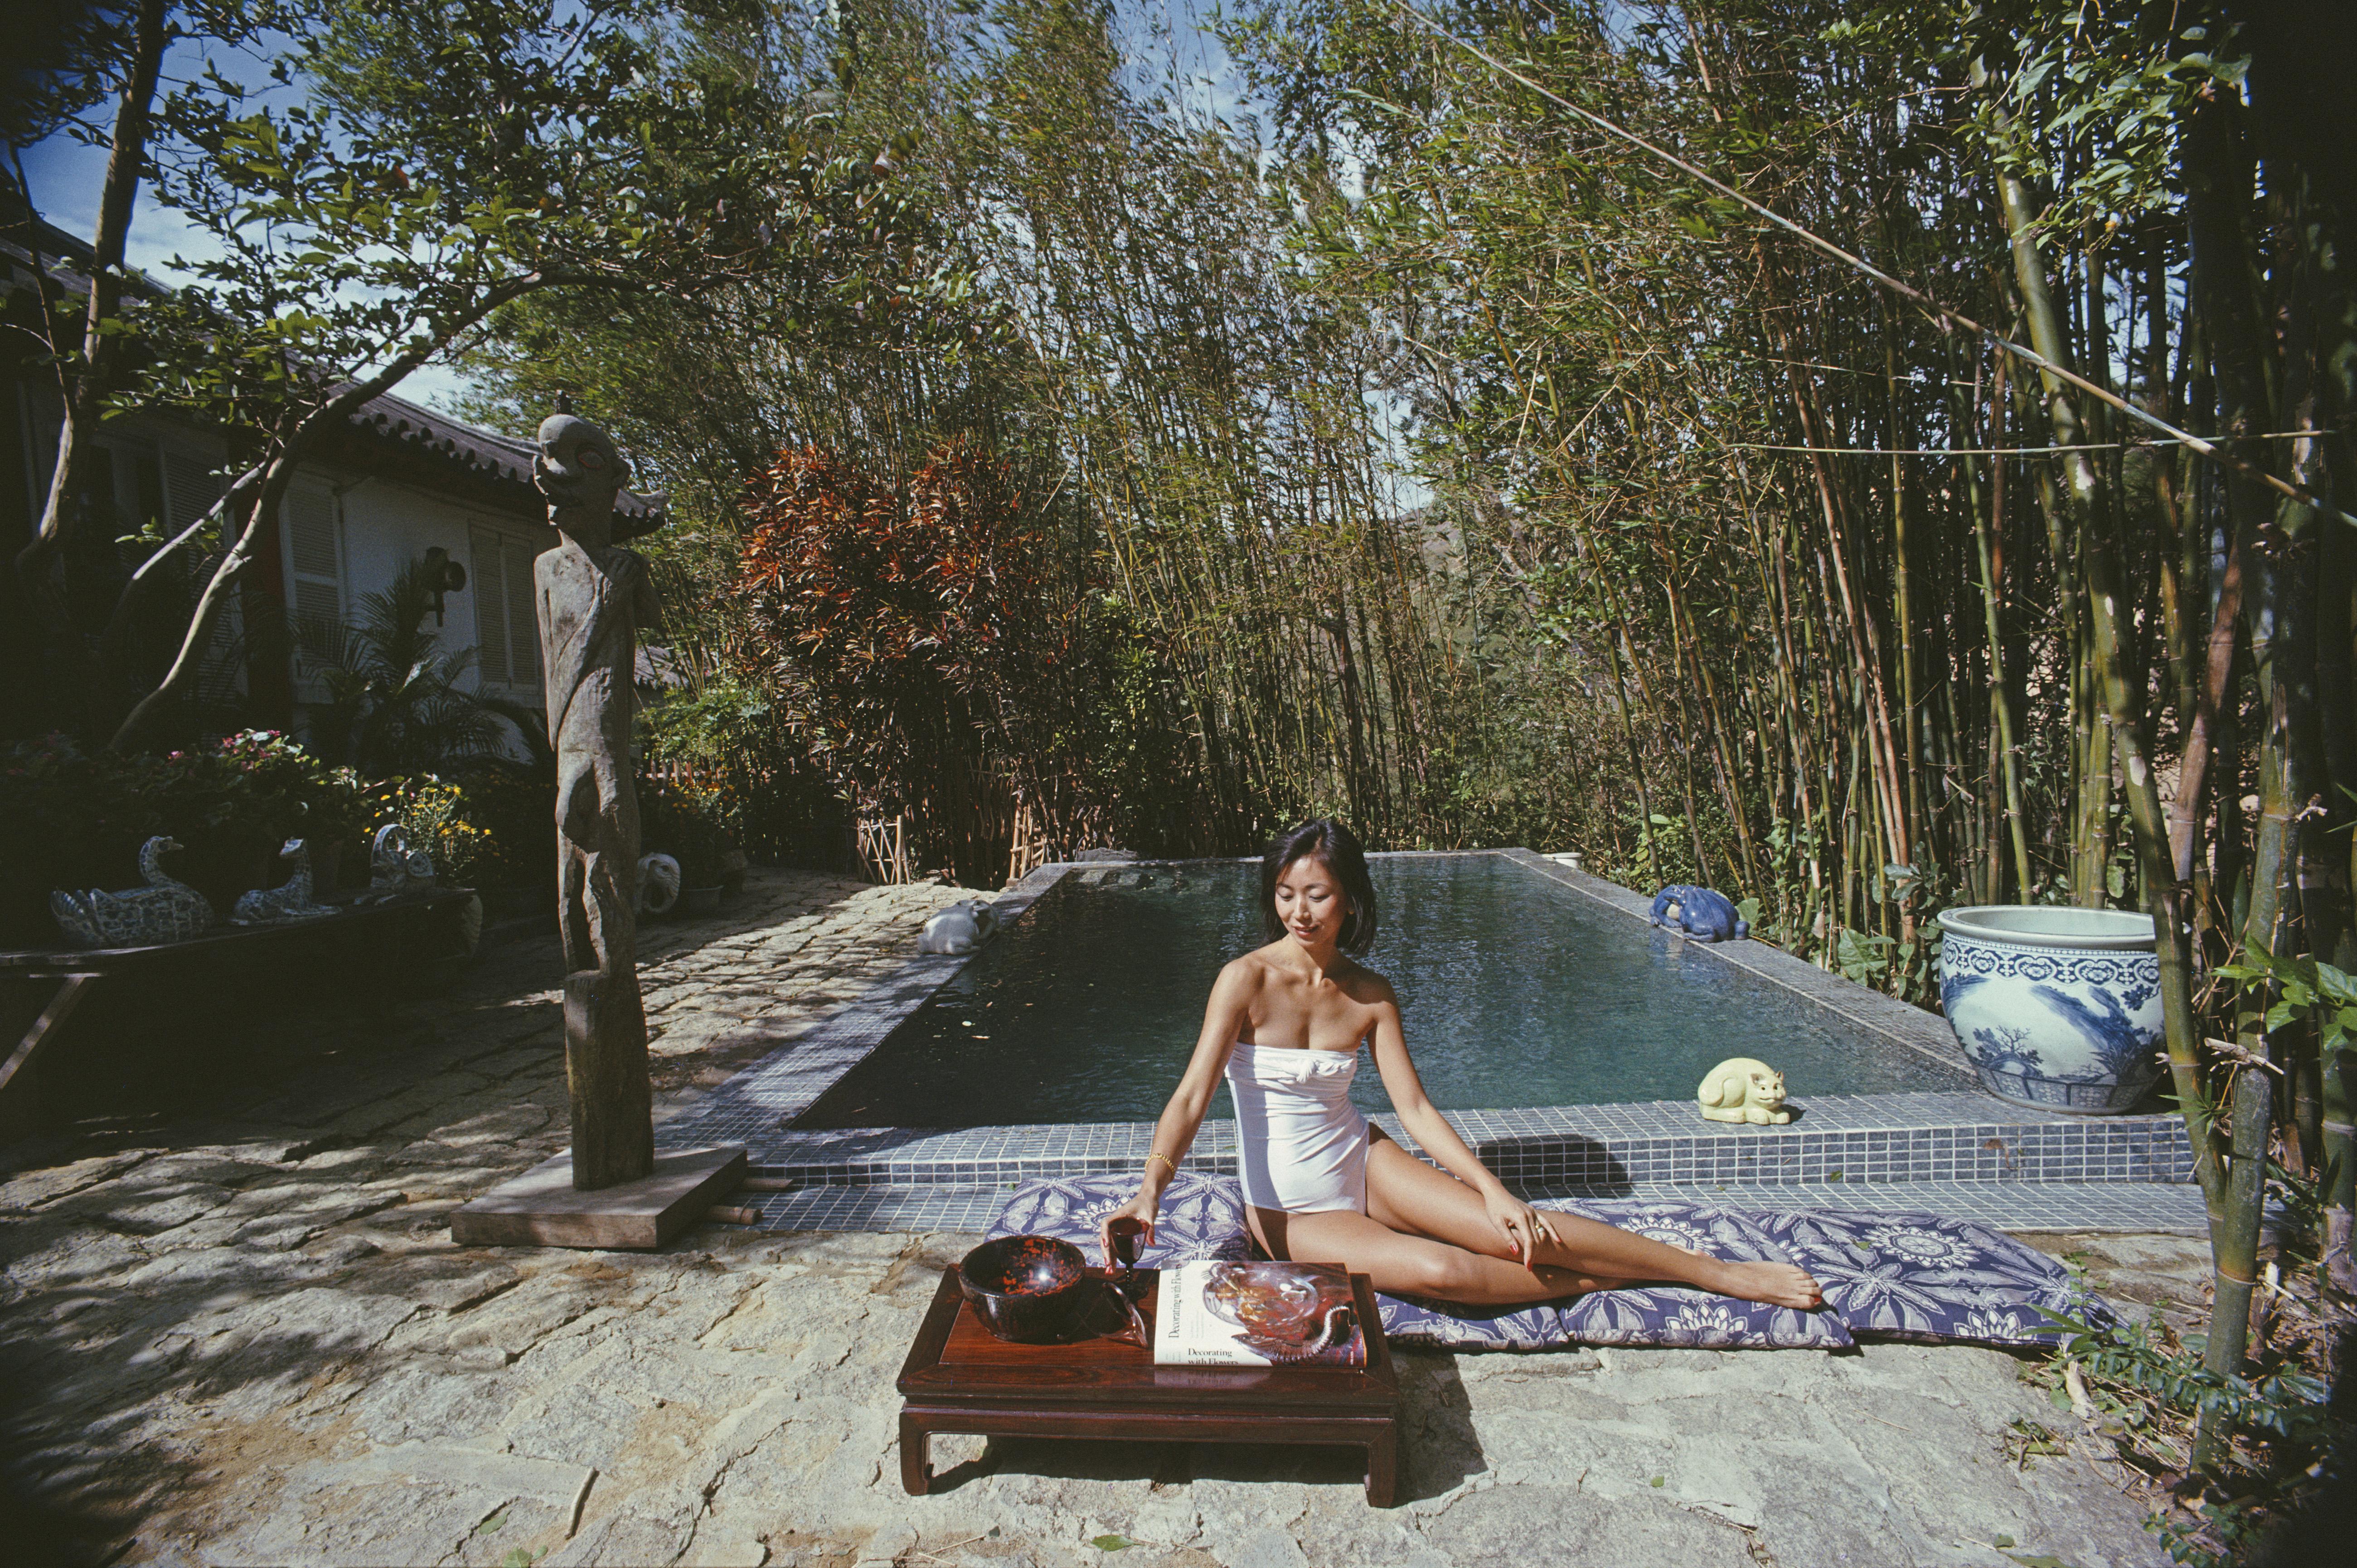 Slim Aarons
Cecily Godfrey, Hong Kong
1979 (printed later)
Lambda C-print
Estate Edition of 150

Cecily Godfrey relaxes by the pool at her home in Hong Kong, 1979. Her husband Gerald is Vice-President of the Court of Appeal in Hong Kong.

Estate